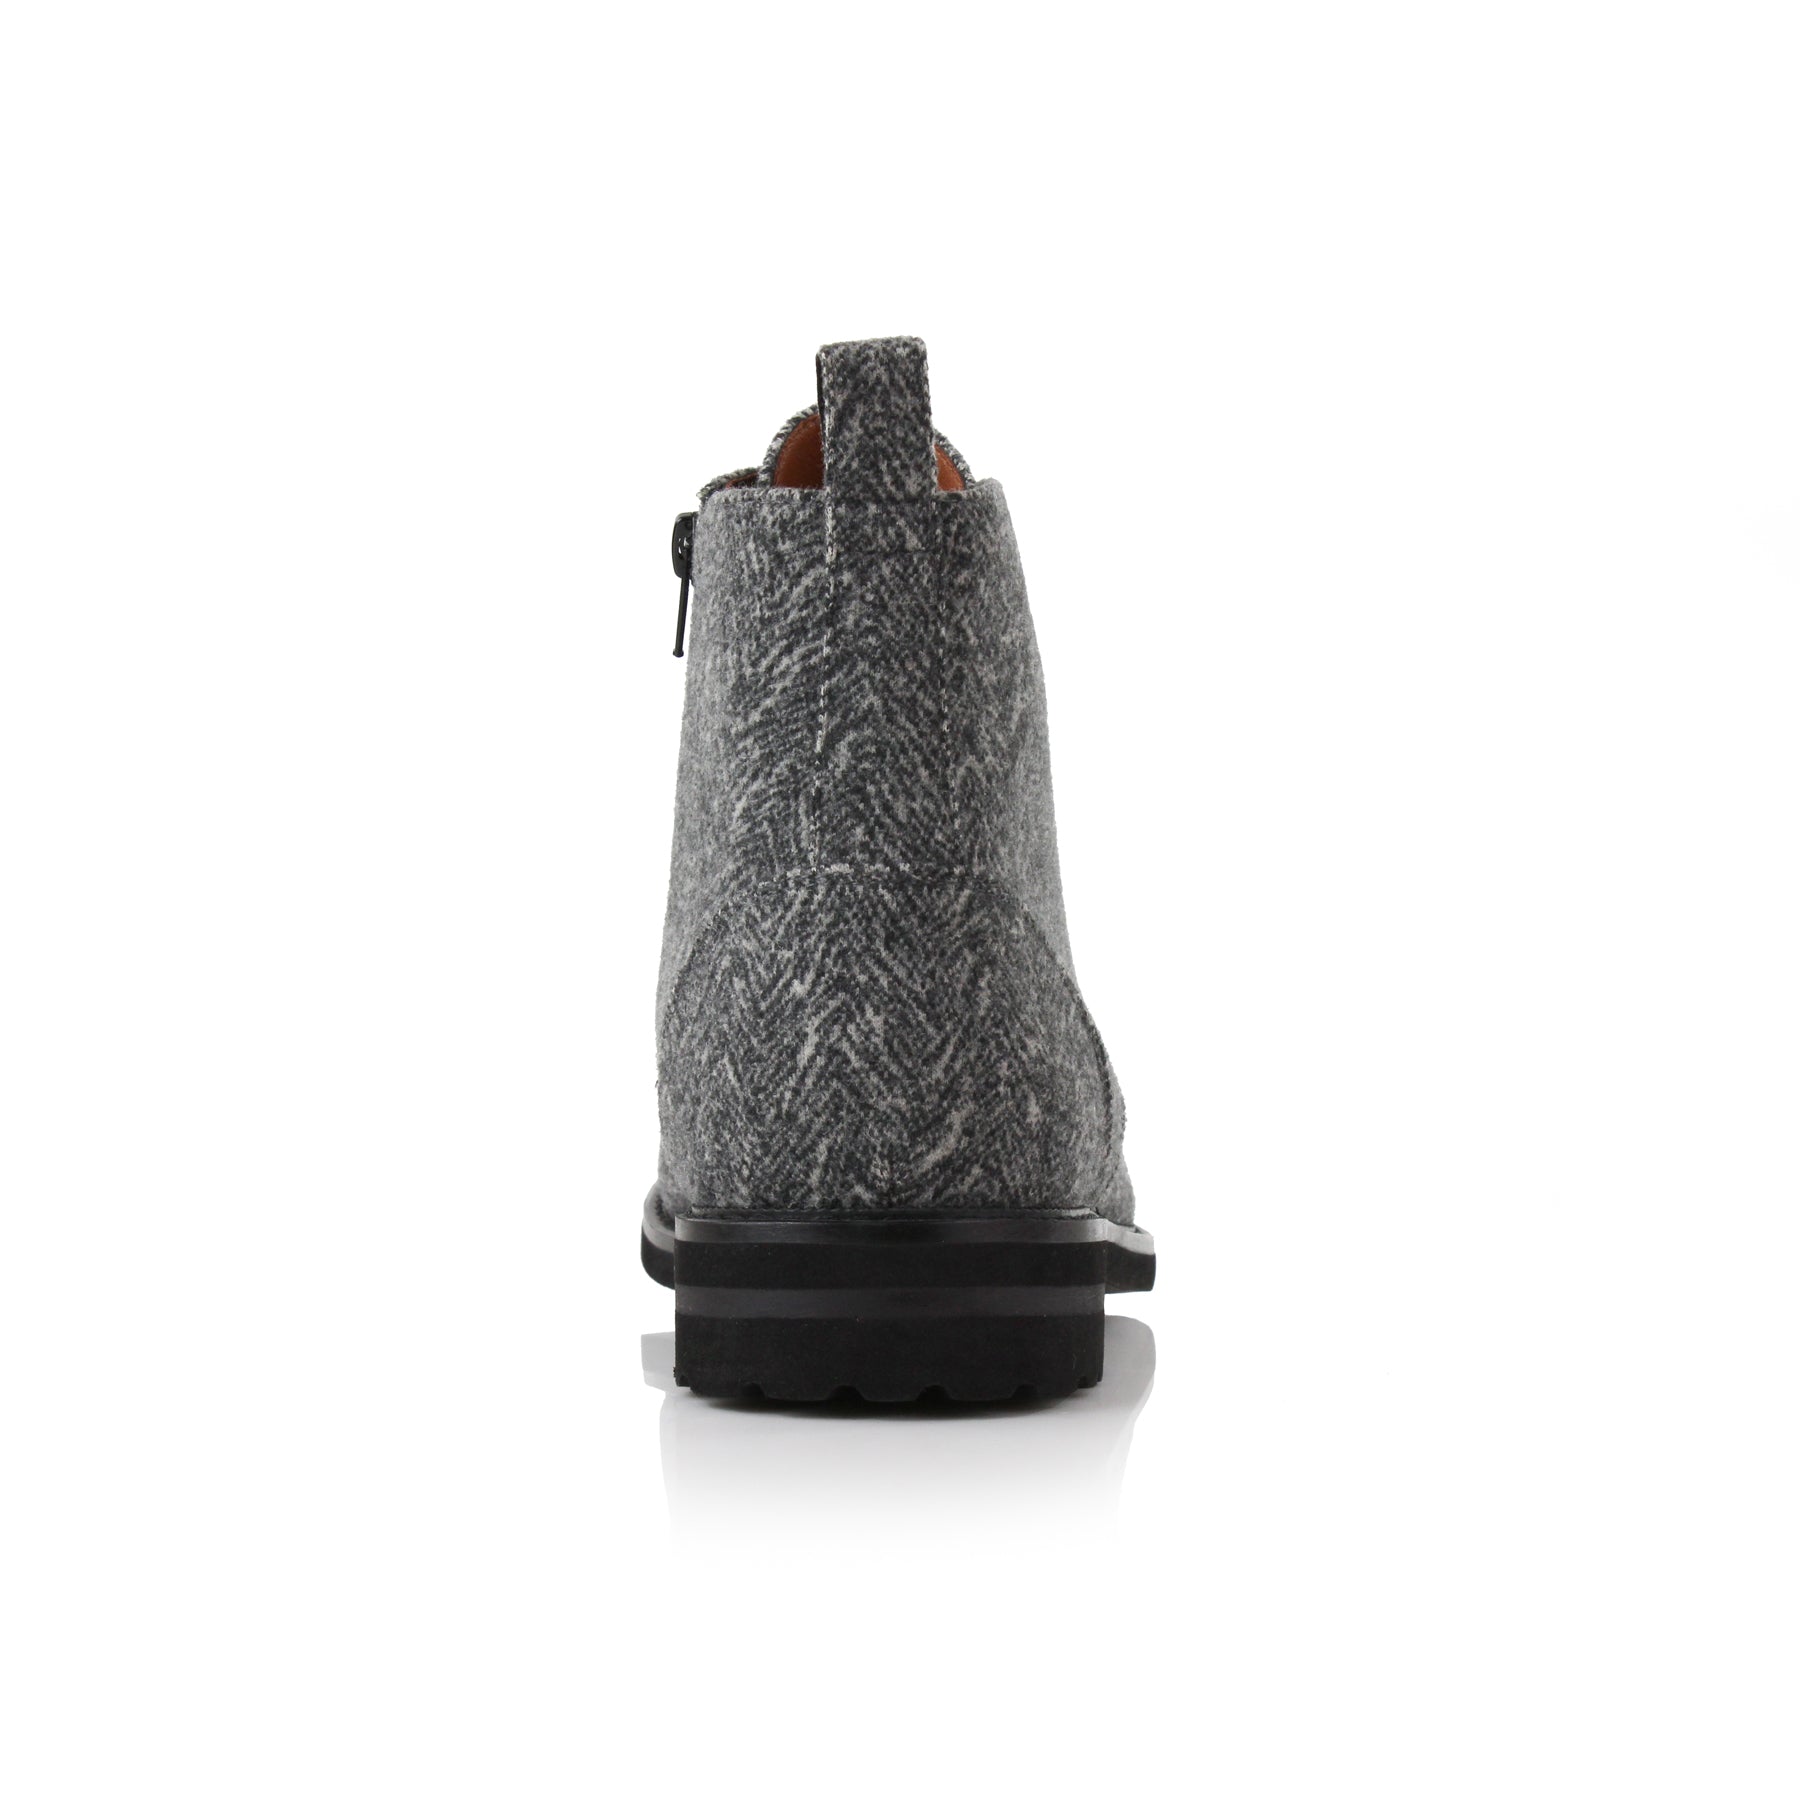 Woolen Ankle Boots | Duke by Polar Fox | Conal Footwear | Back Angle View